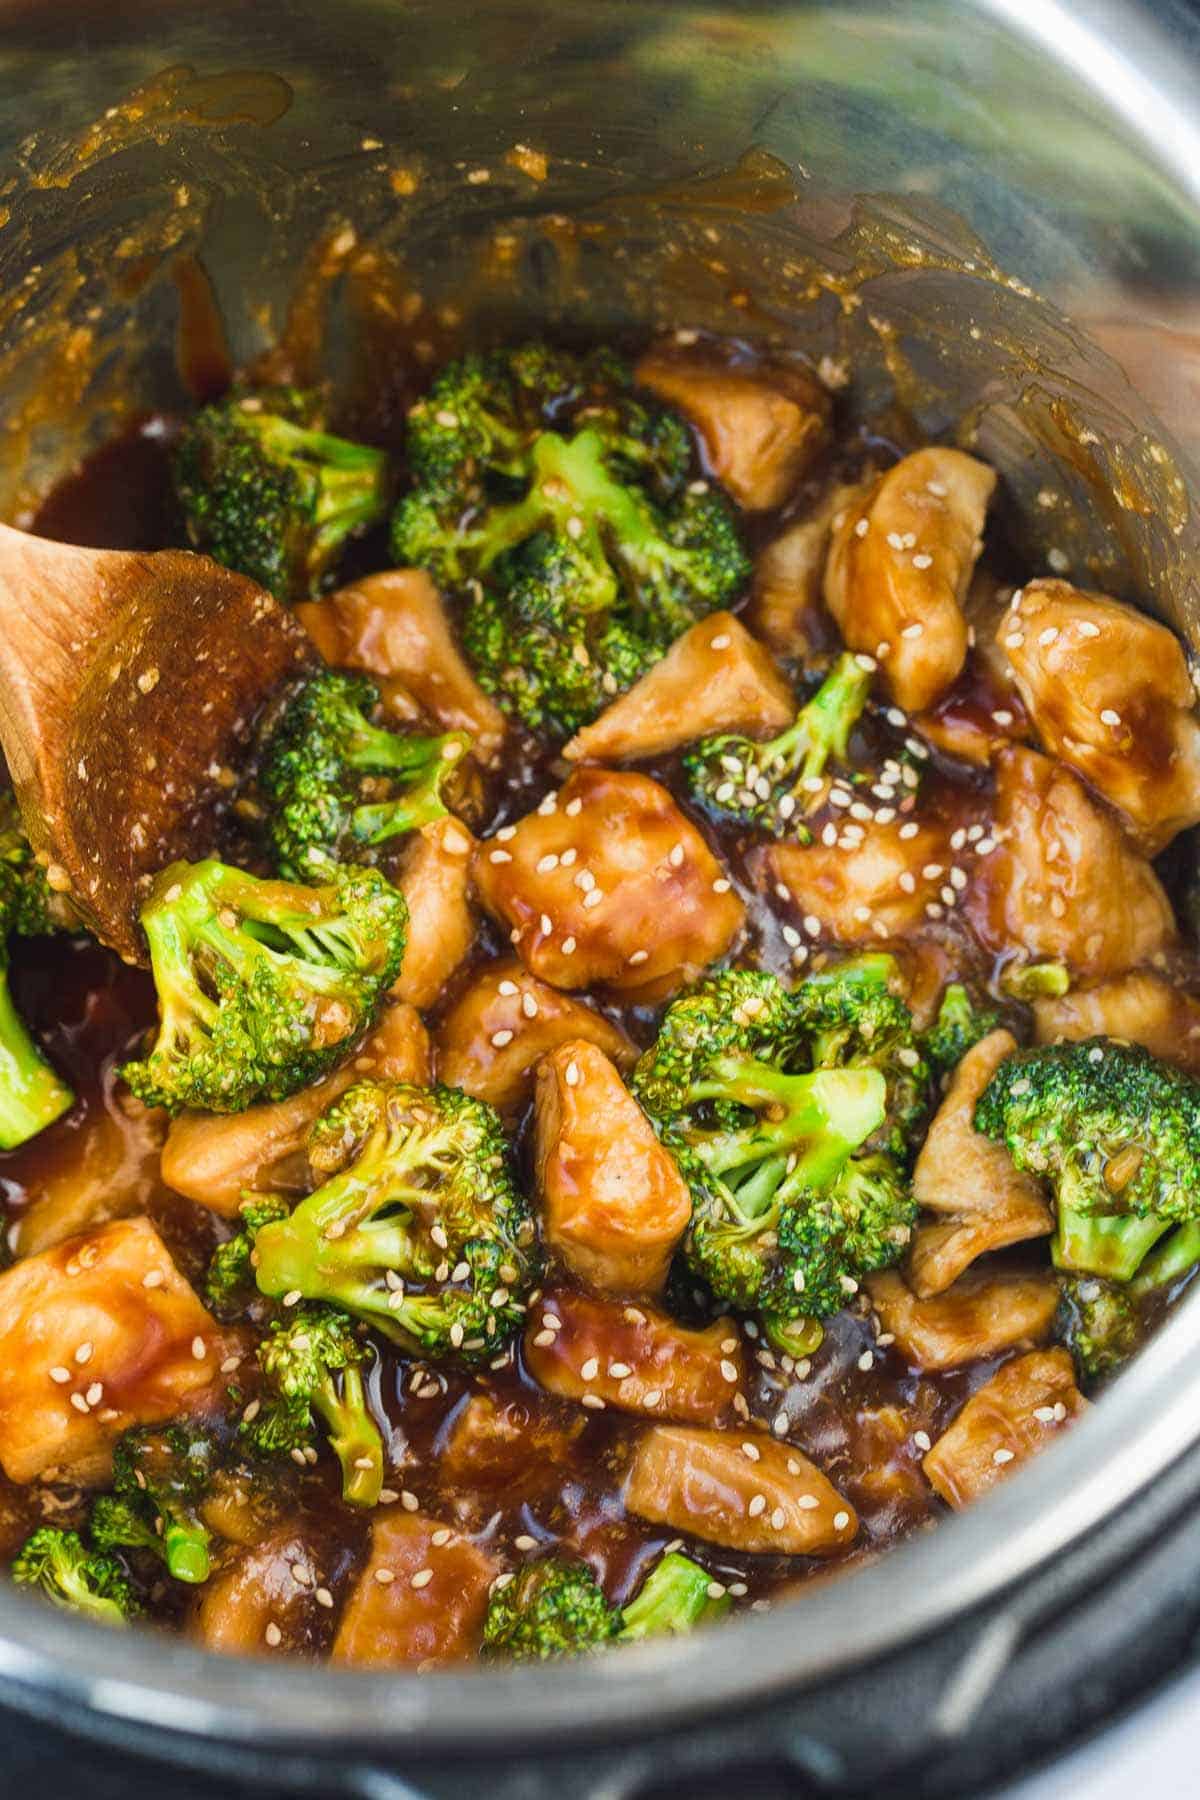 Cooked chicken and broccoli in the instant pot